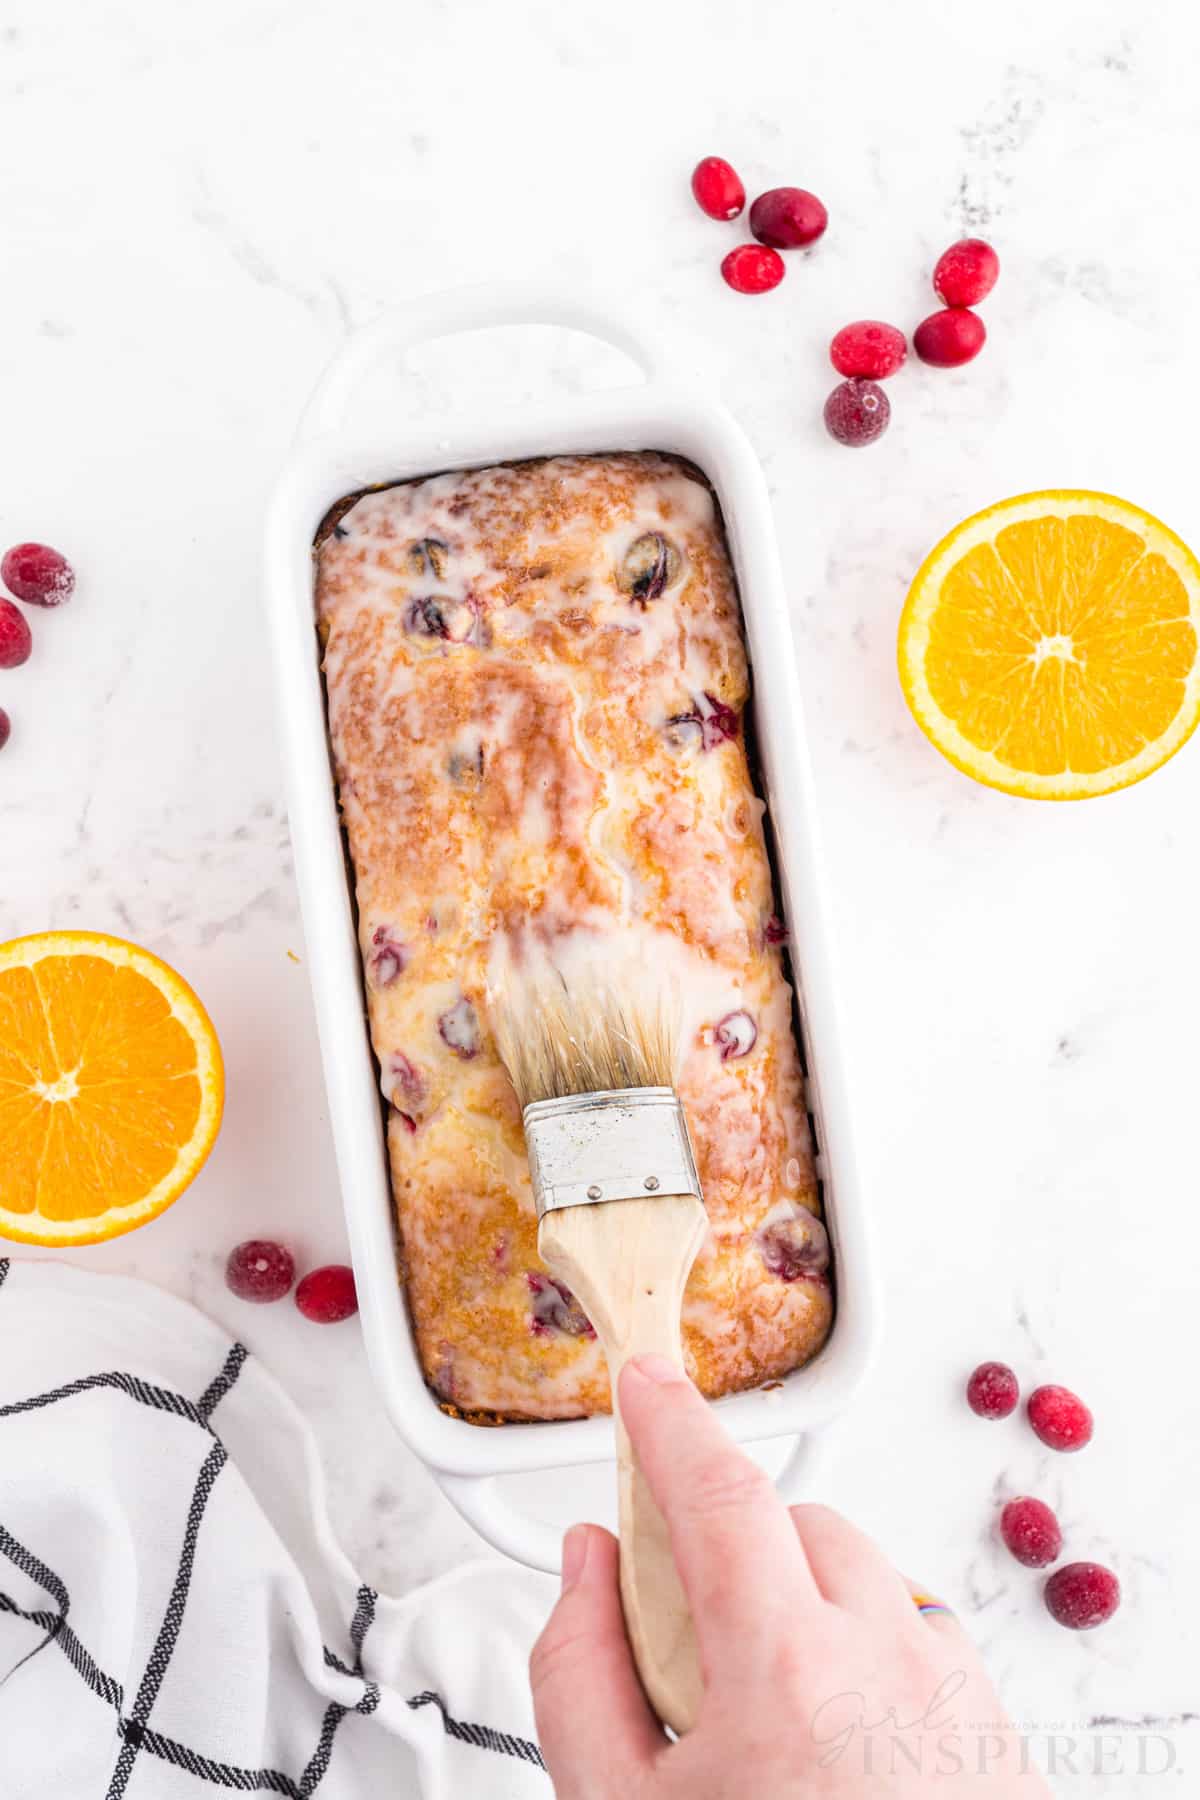 Hand brushing orange sugar glaze with a pastry brush on the top of the baked and cooled orange cranberry bread in white loaf pan, checked linen, sliced oranges, whole loose cranberries, on a white marble countertop.